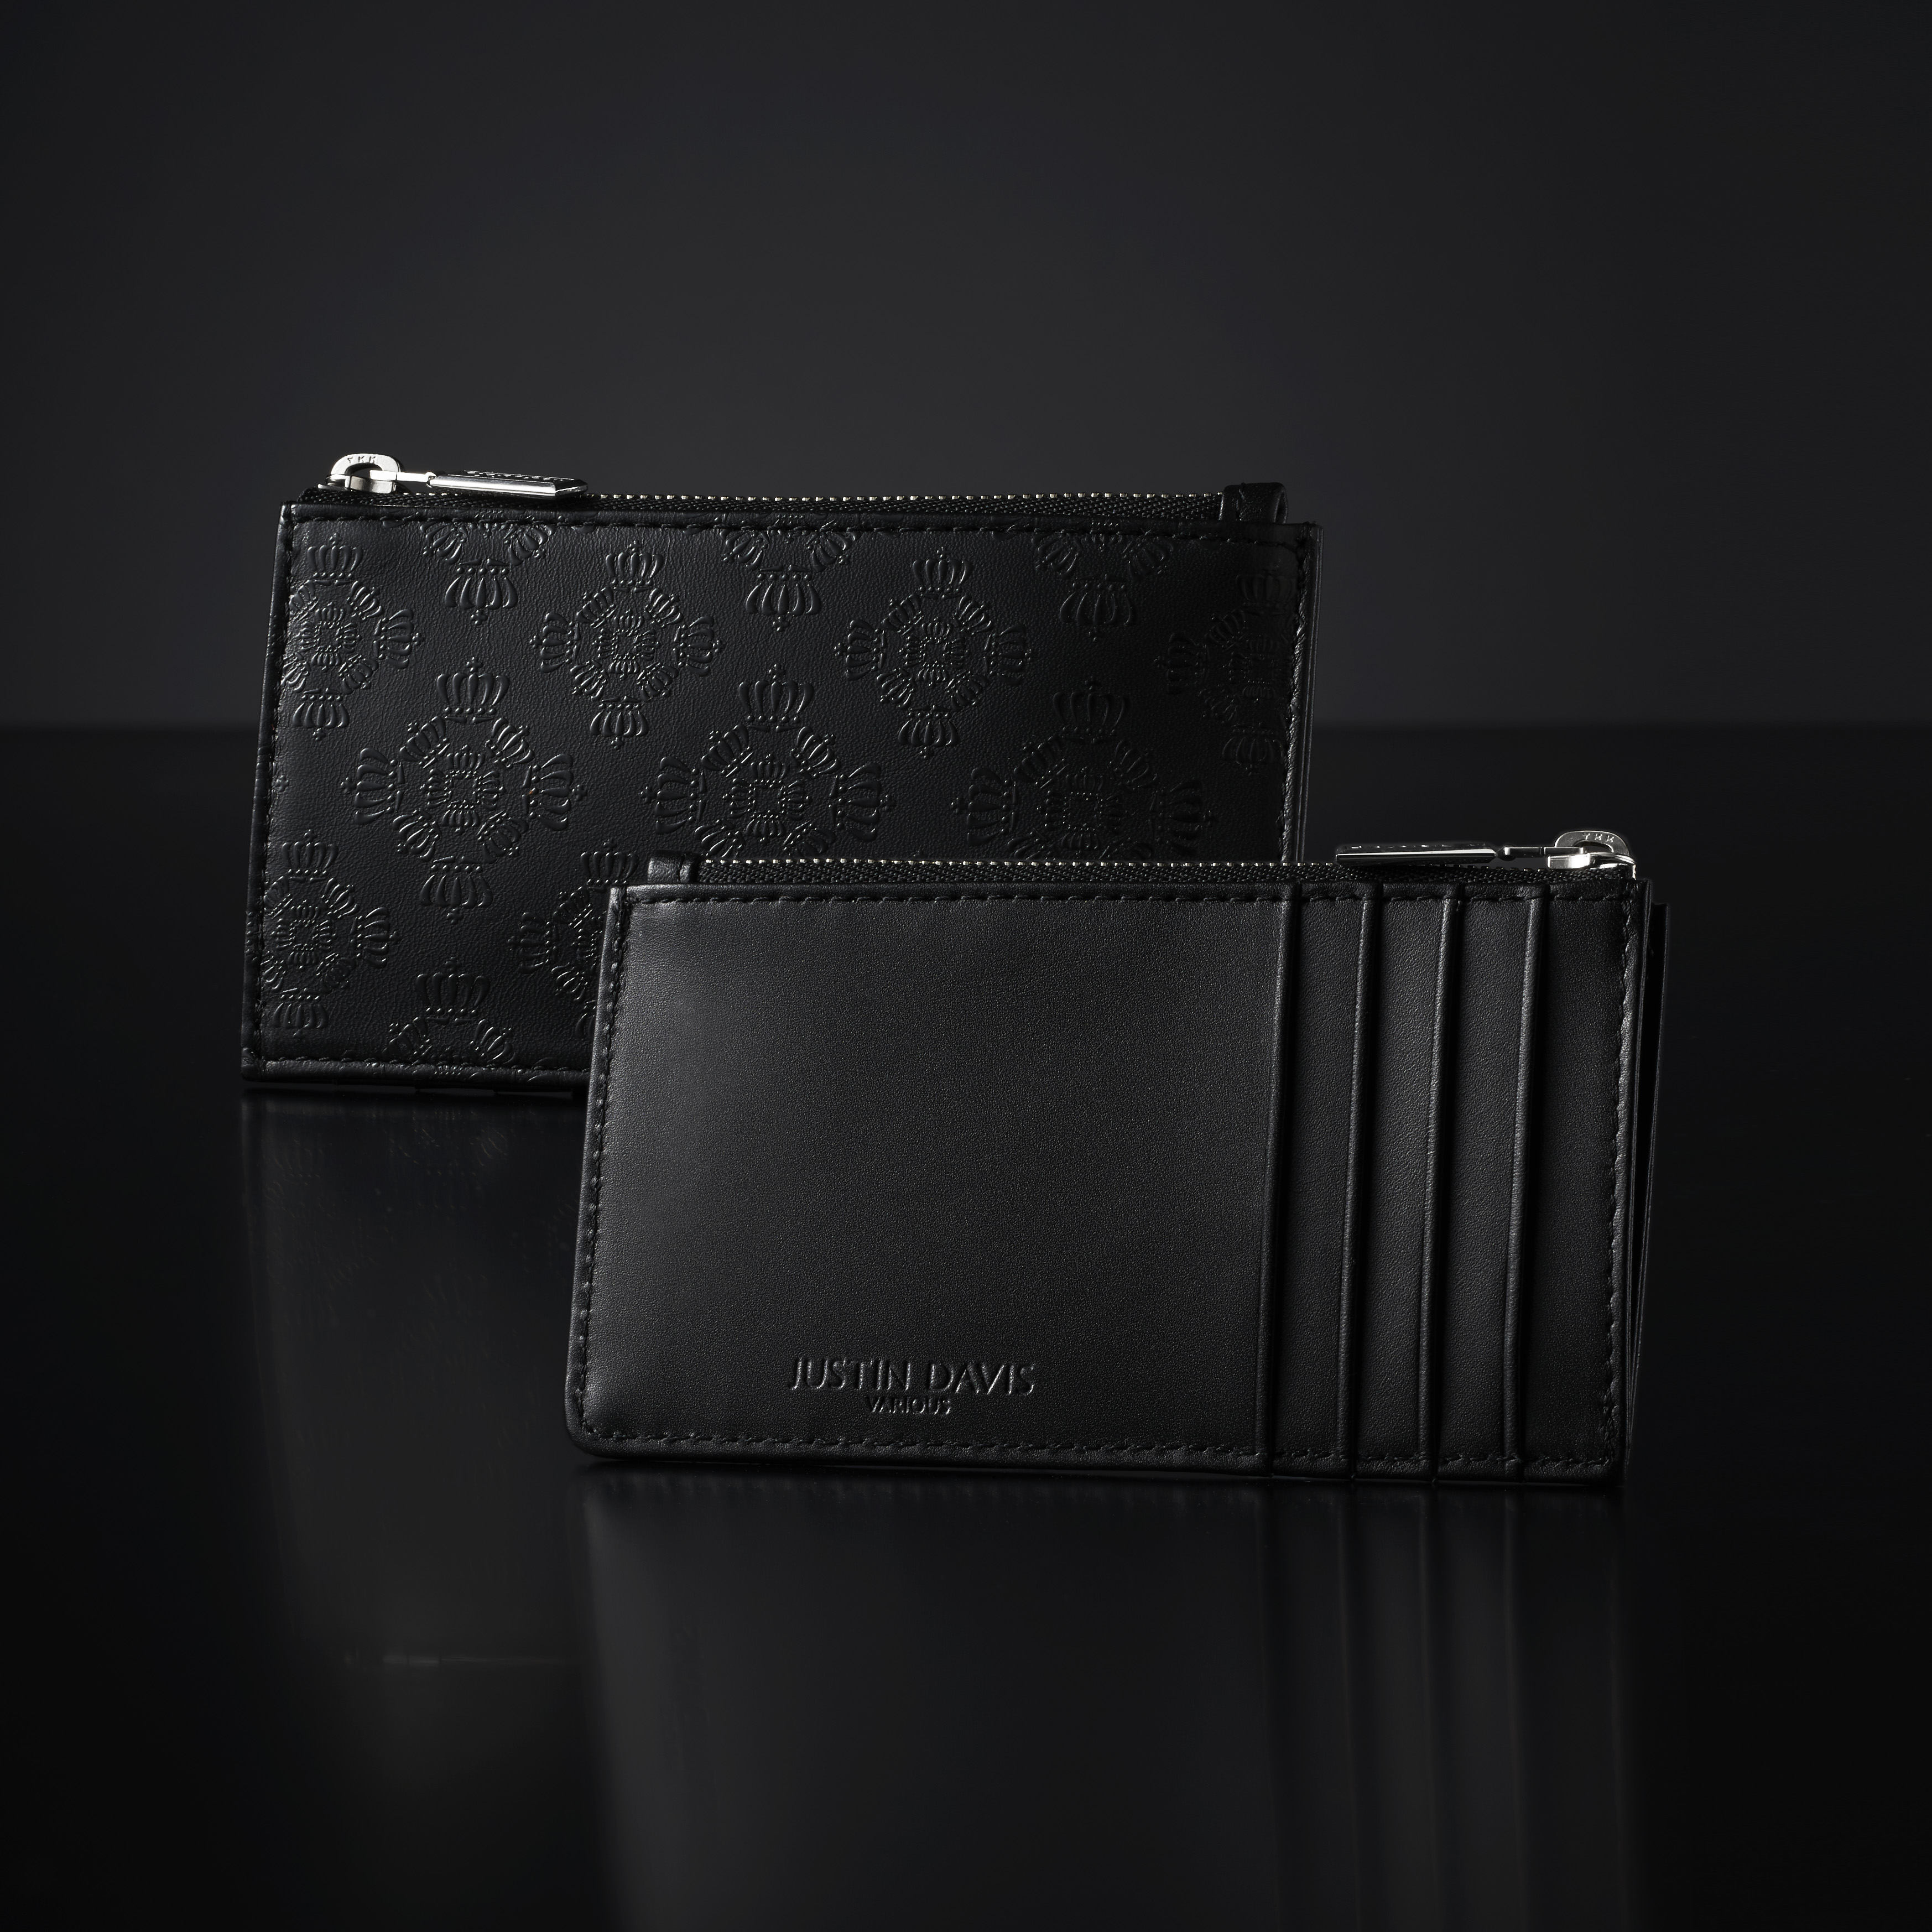 STEPHALIAM” ZIP CARD HOLDER – ジャスティン デイビス OFFICIAL